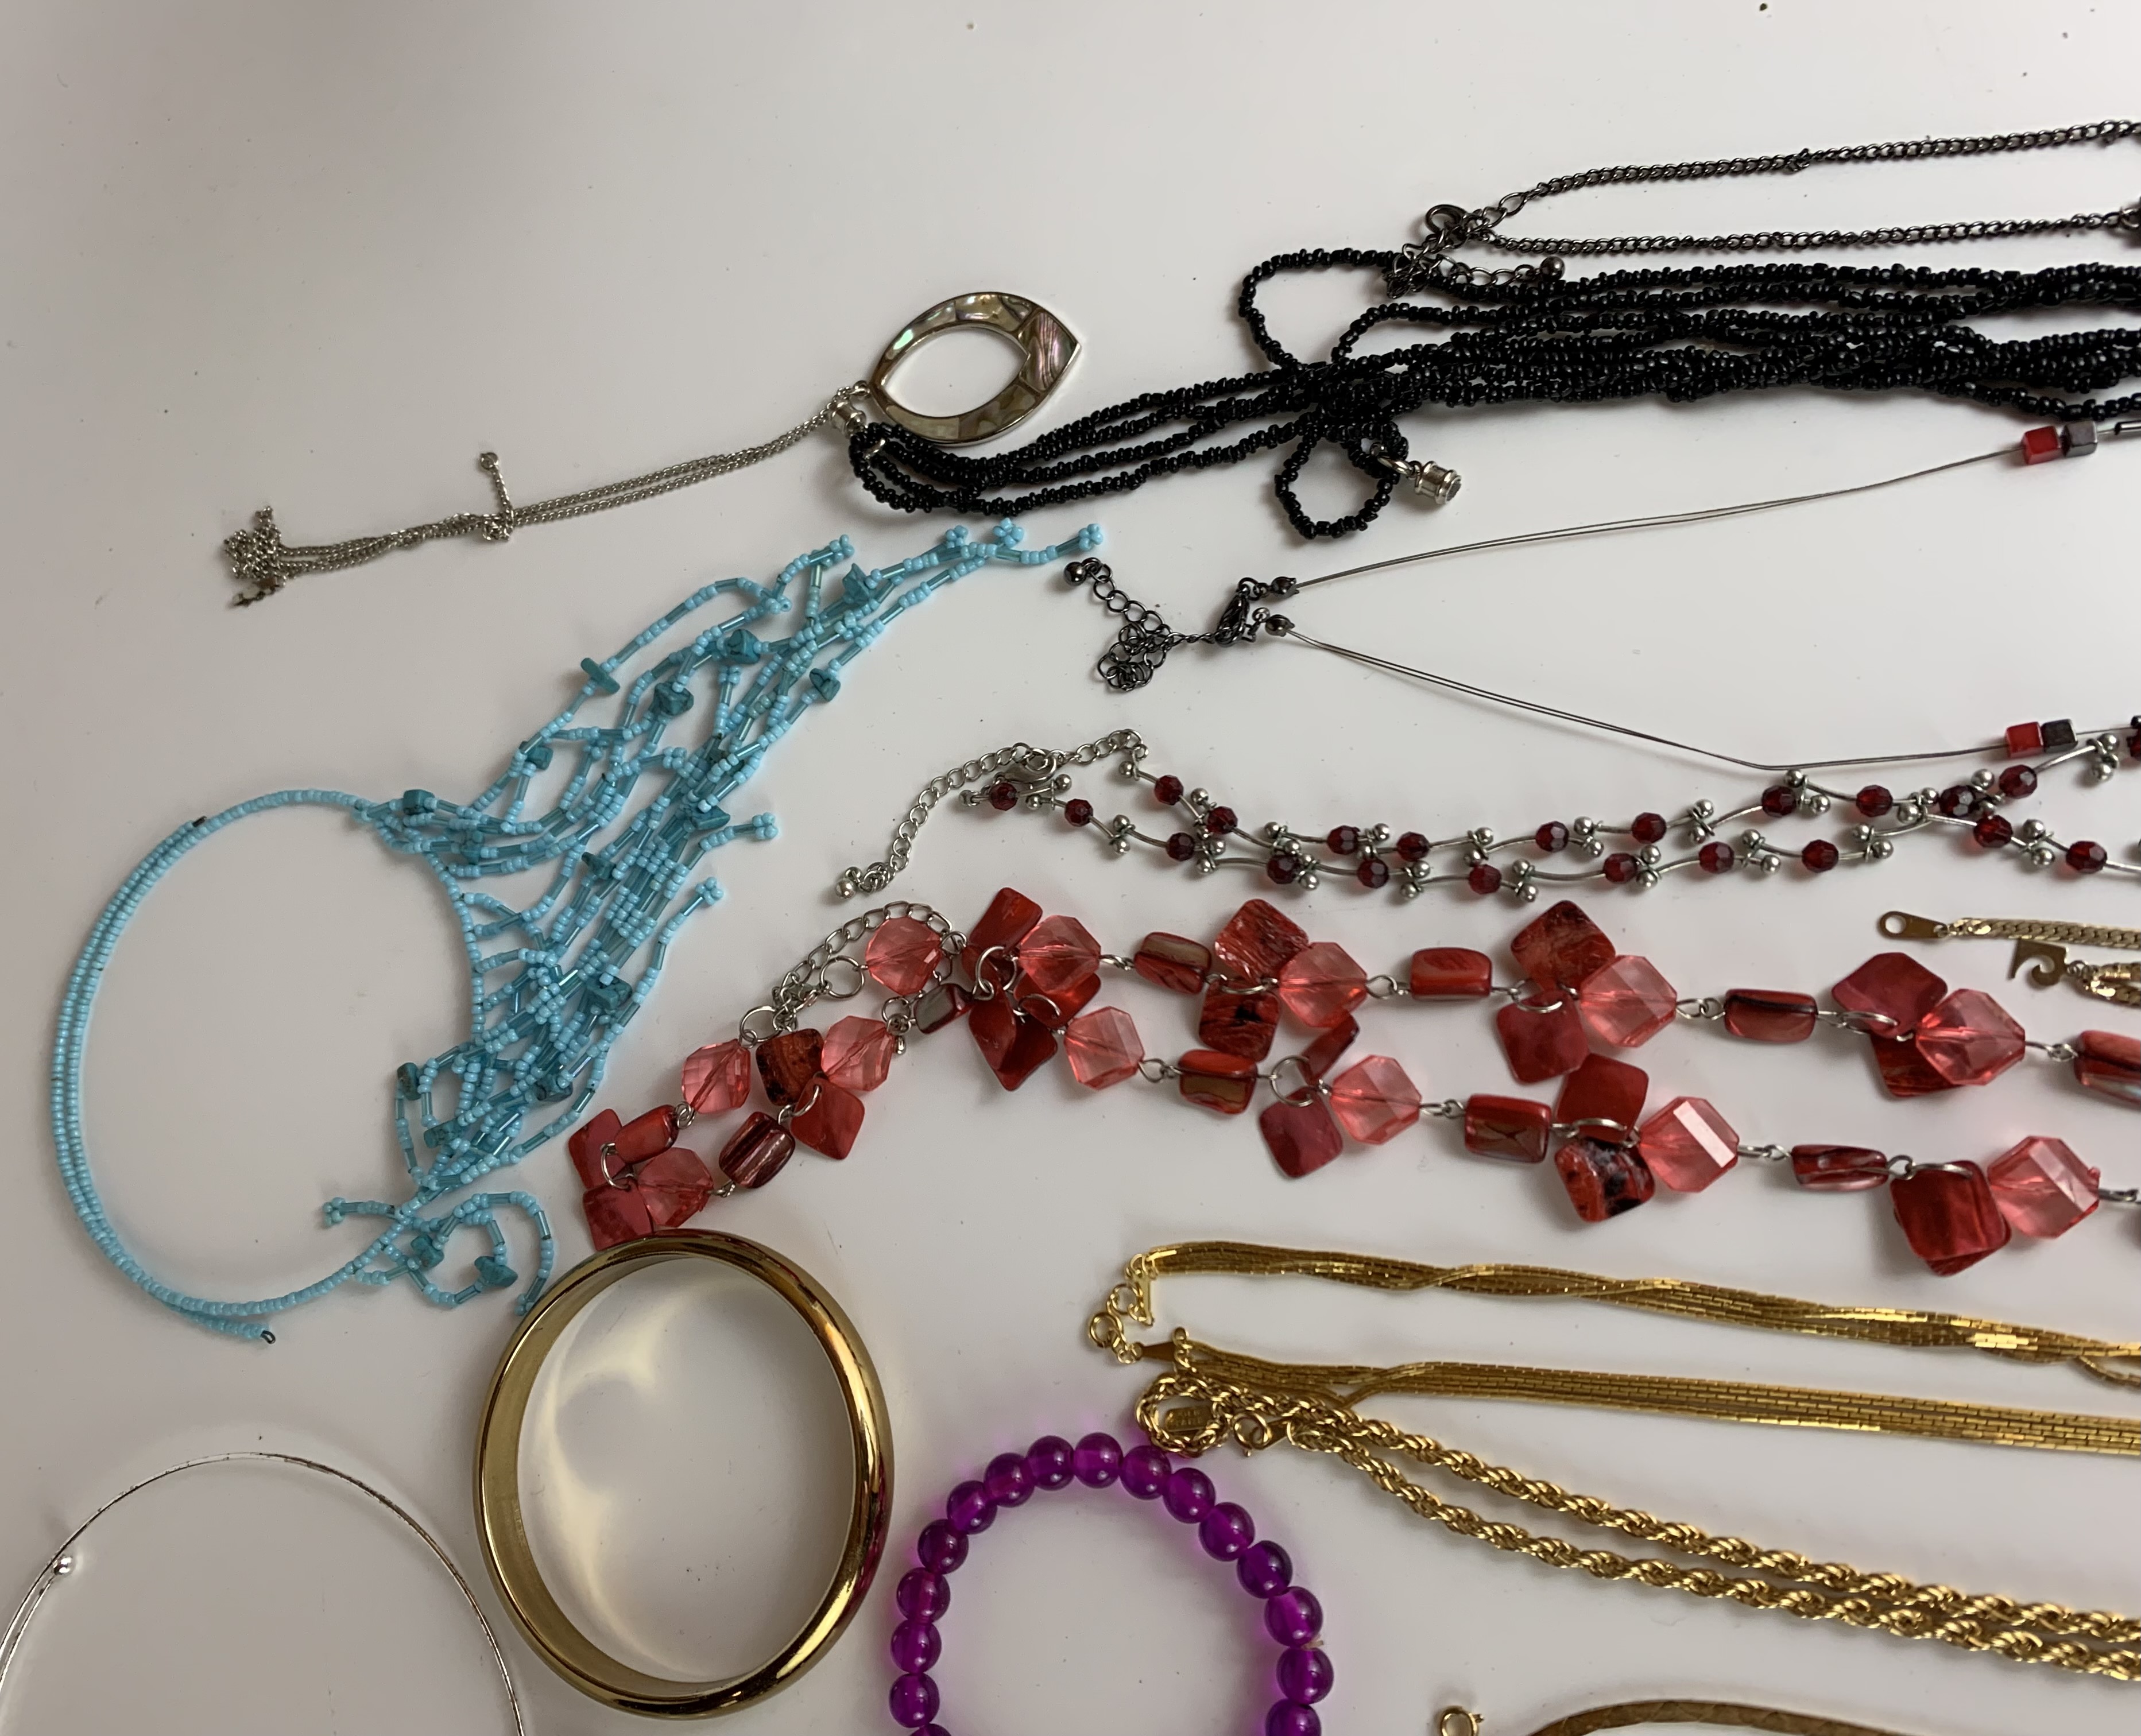 Dress jewellery including necklaces, beads, bracelets, rings etc. - Image 12 of 14